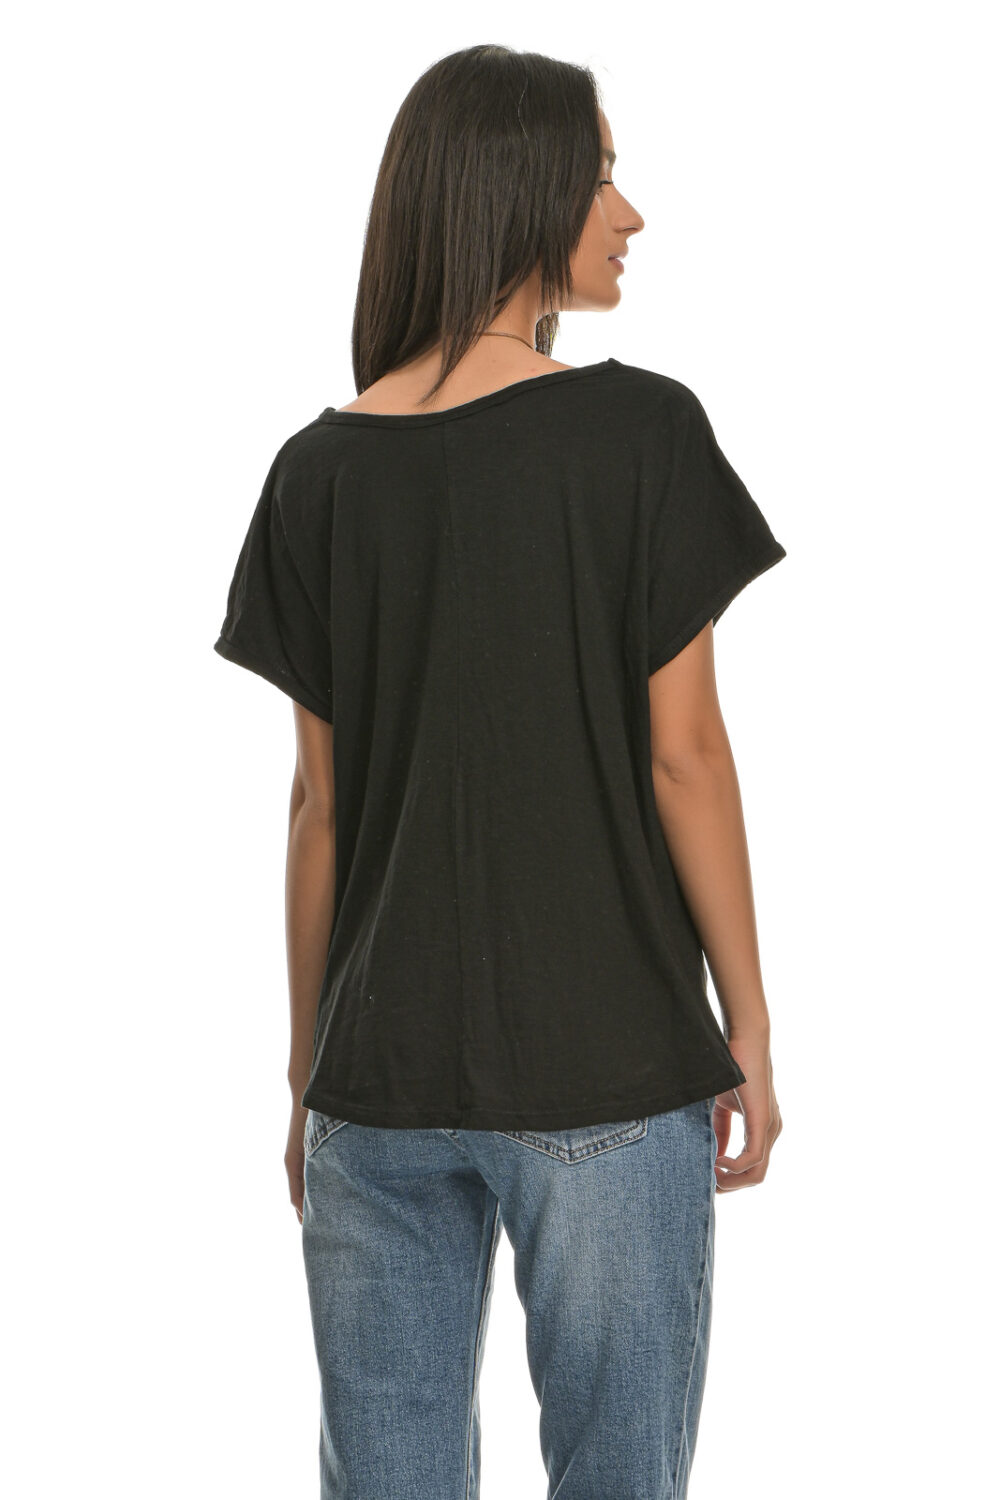 Cotton blouse with front fastening and necklace black